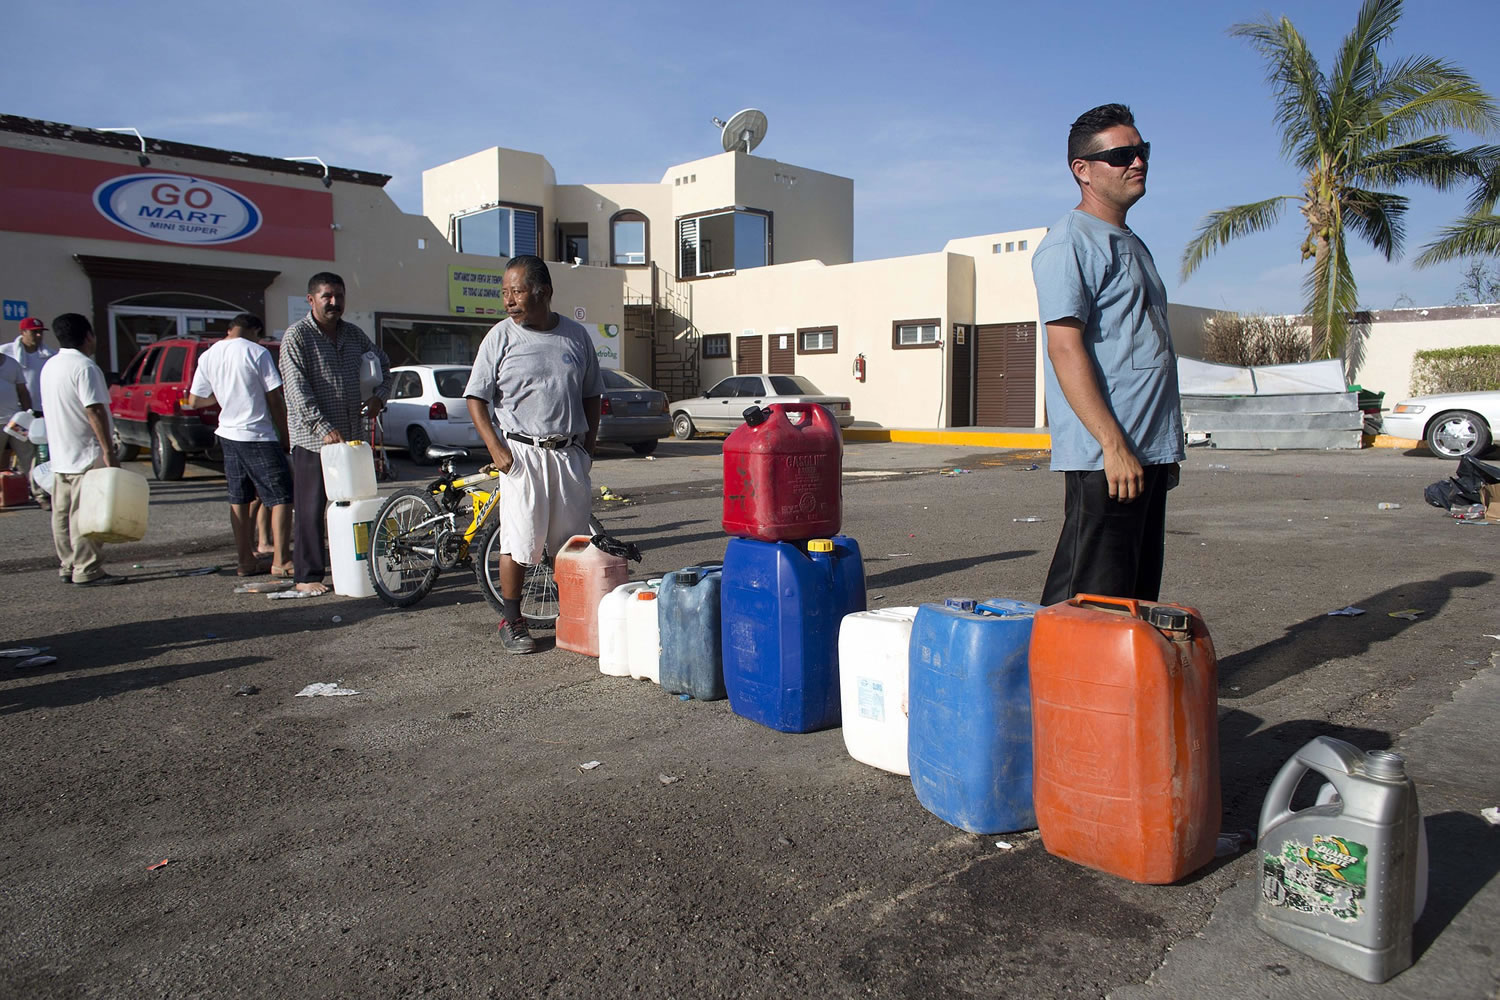 People wait in line to fill up their jugs and bottles with fuel at a gasoline station in San Jose de los Cabos, Mexico, on Thursday.